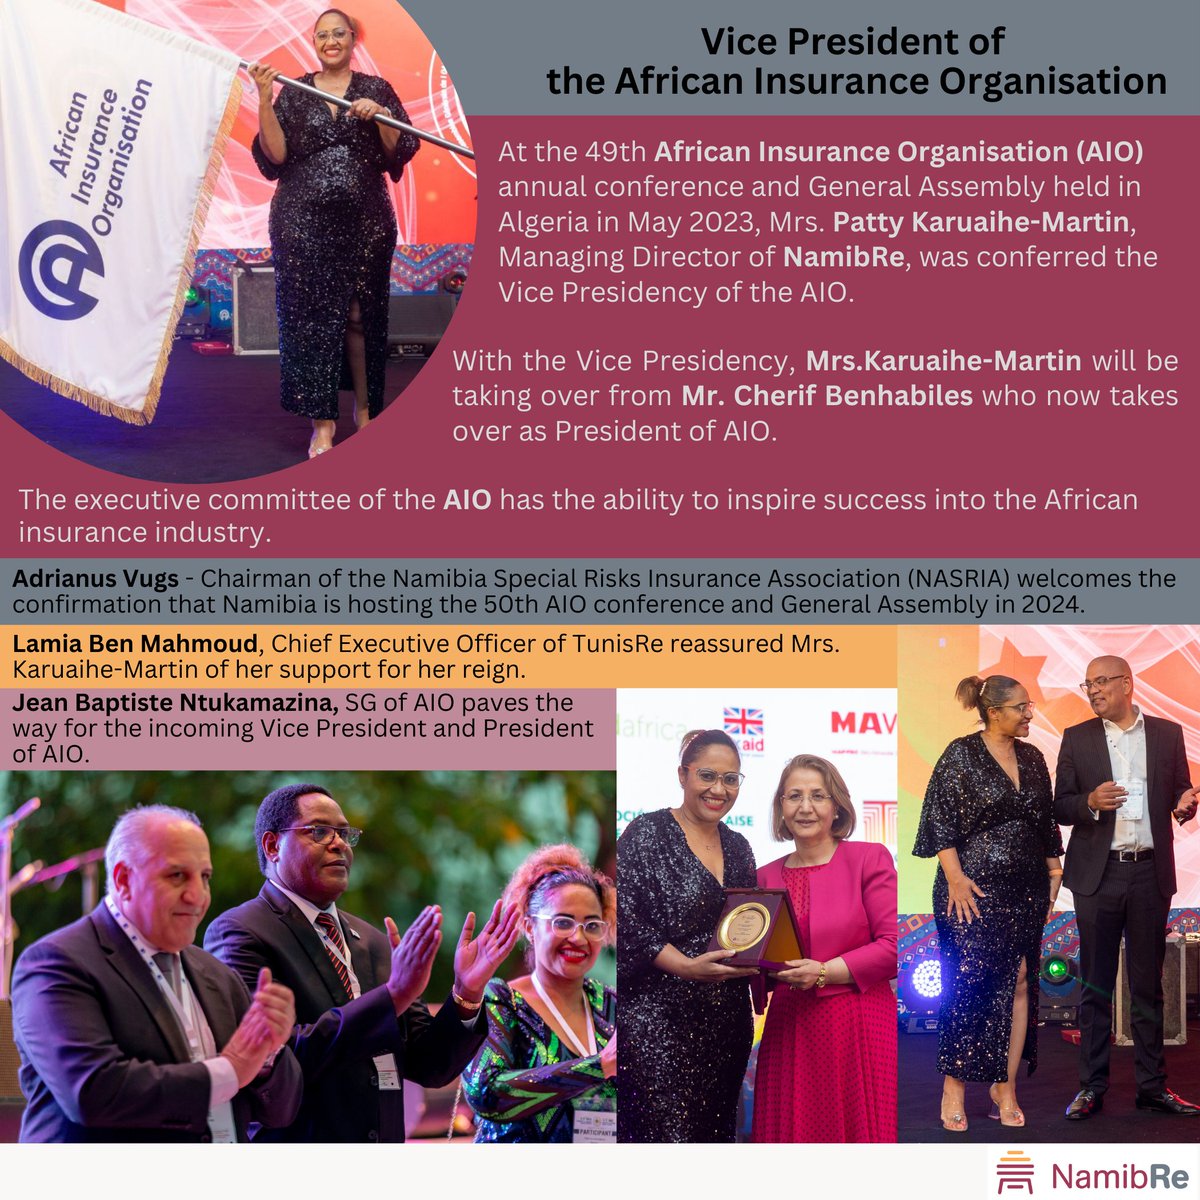 This amazing accomplishment is just one step on the NamibRe journey.

Congratulations to our Managing Director Patty Karuaihe-Martin on this incredible milestone!

#AIO2024 #leadership #insuranceindustry #africanexcellence #namibiaonthemap